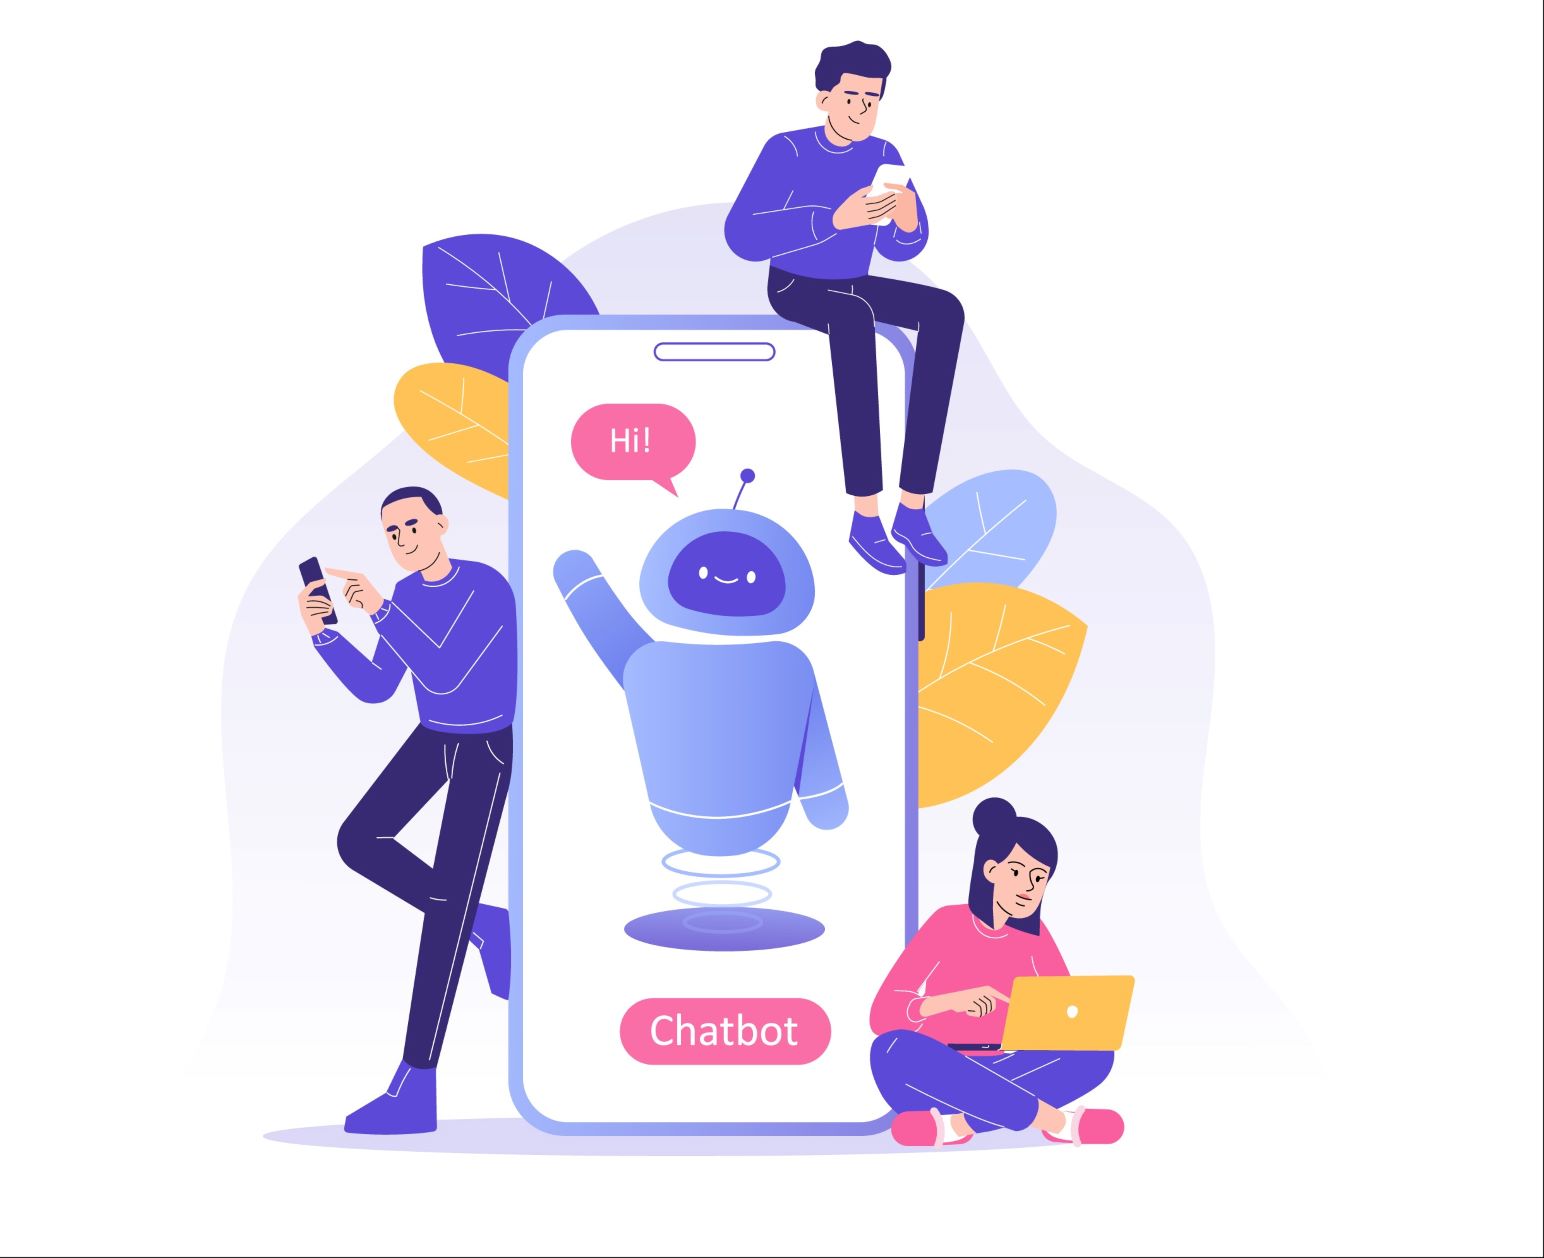 5 Important Characteristics Of A Support Chatbot